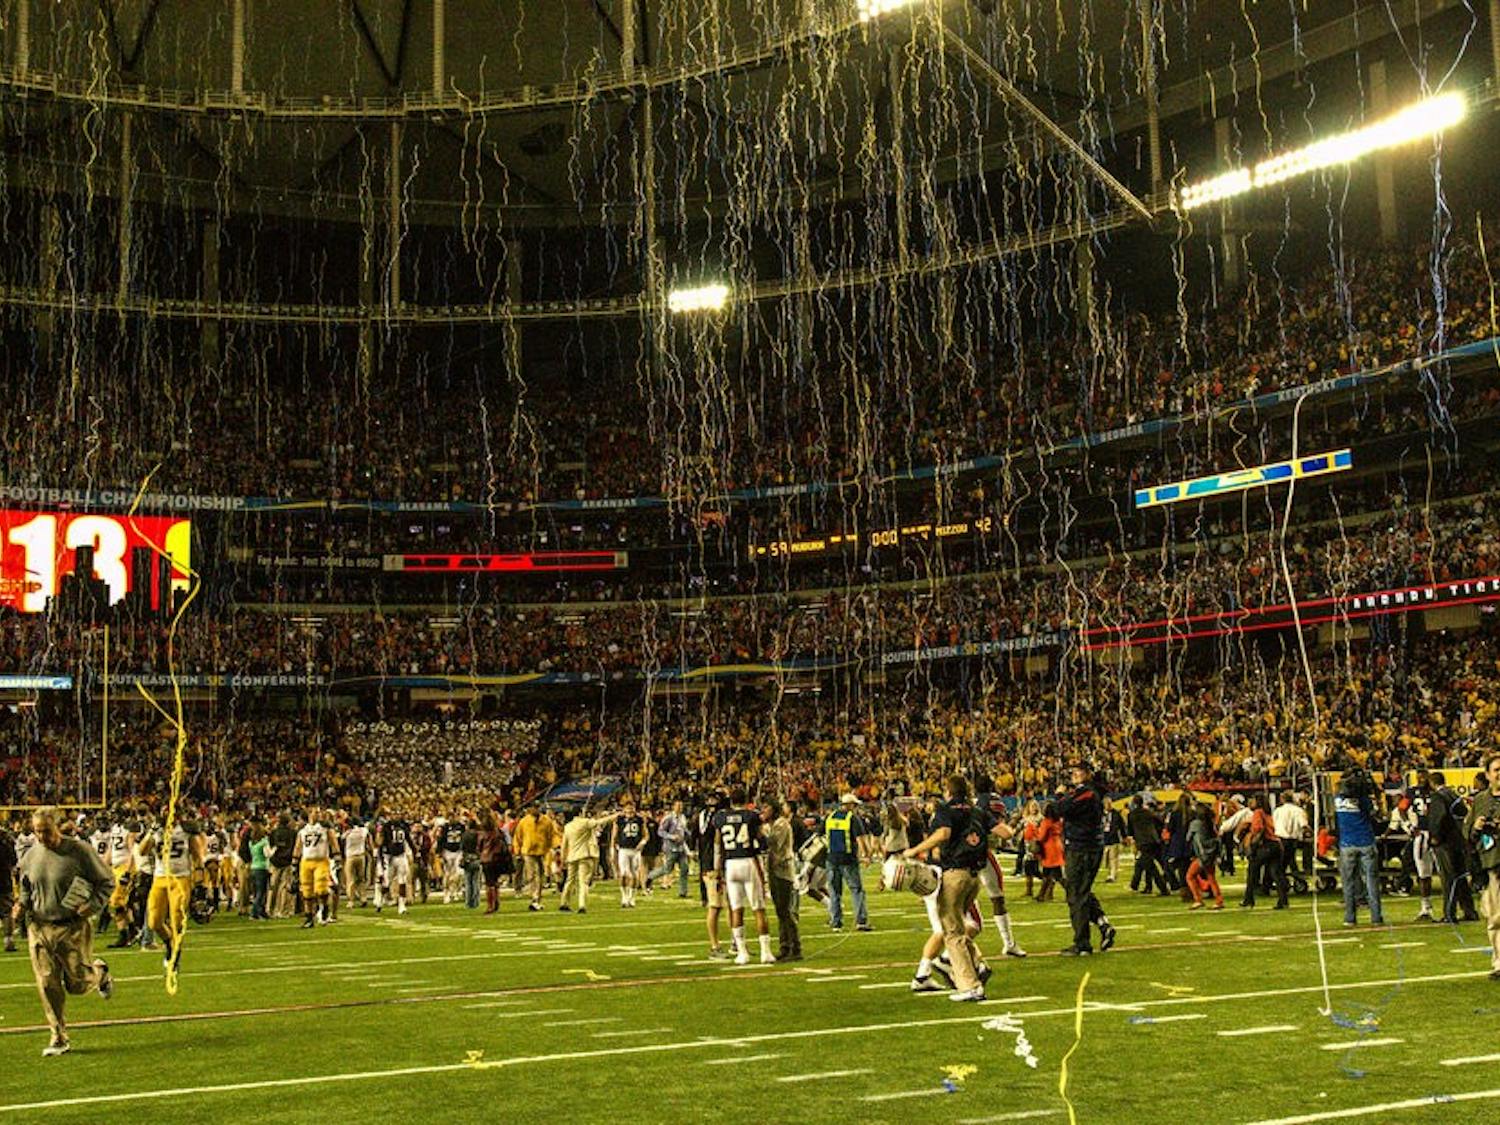 Streamers erupt from the ceiling of the Georgia Dome as the Auburn Tigers are declared SEC Champions.
Raye May / Photo & Design Assistant